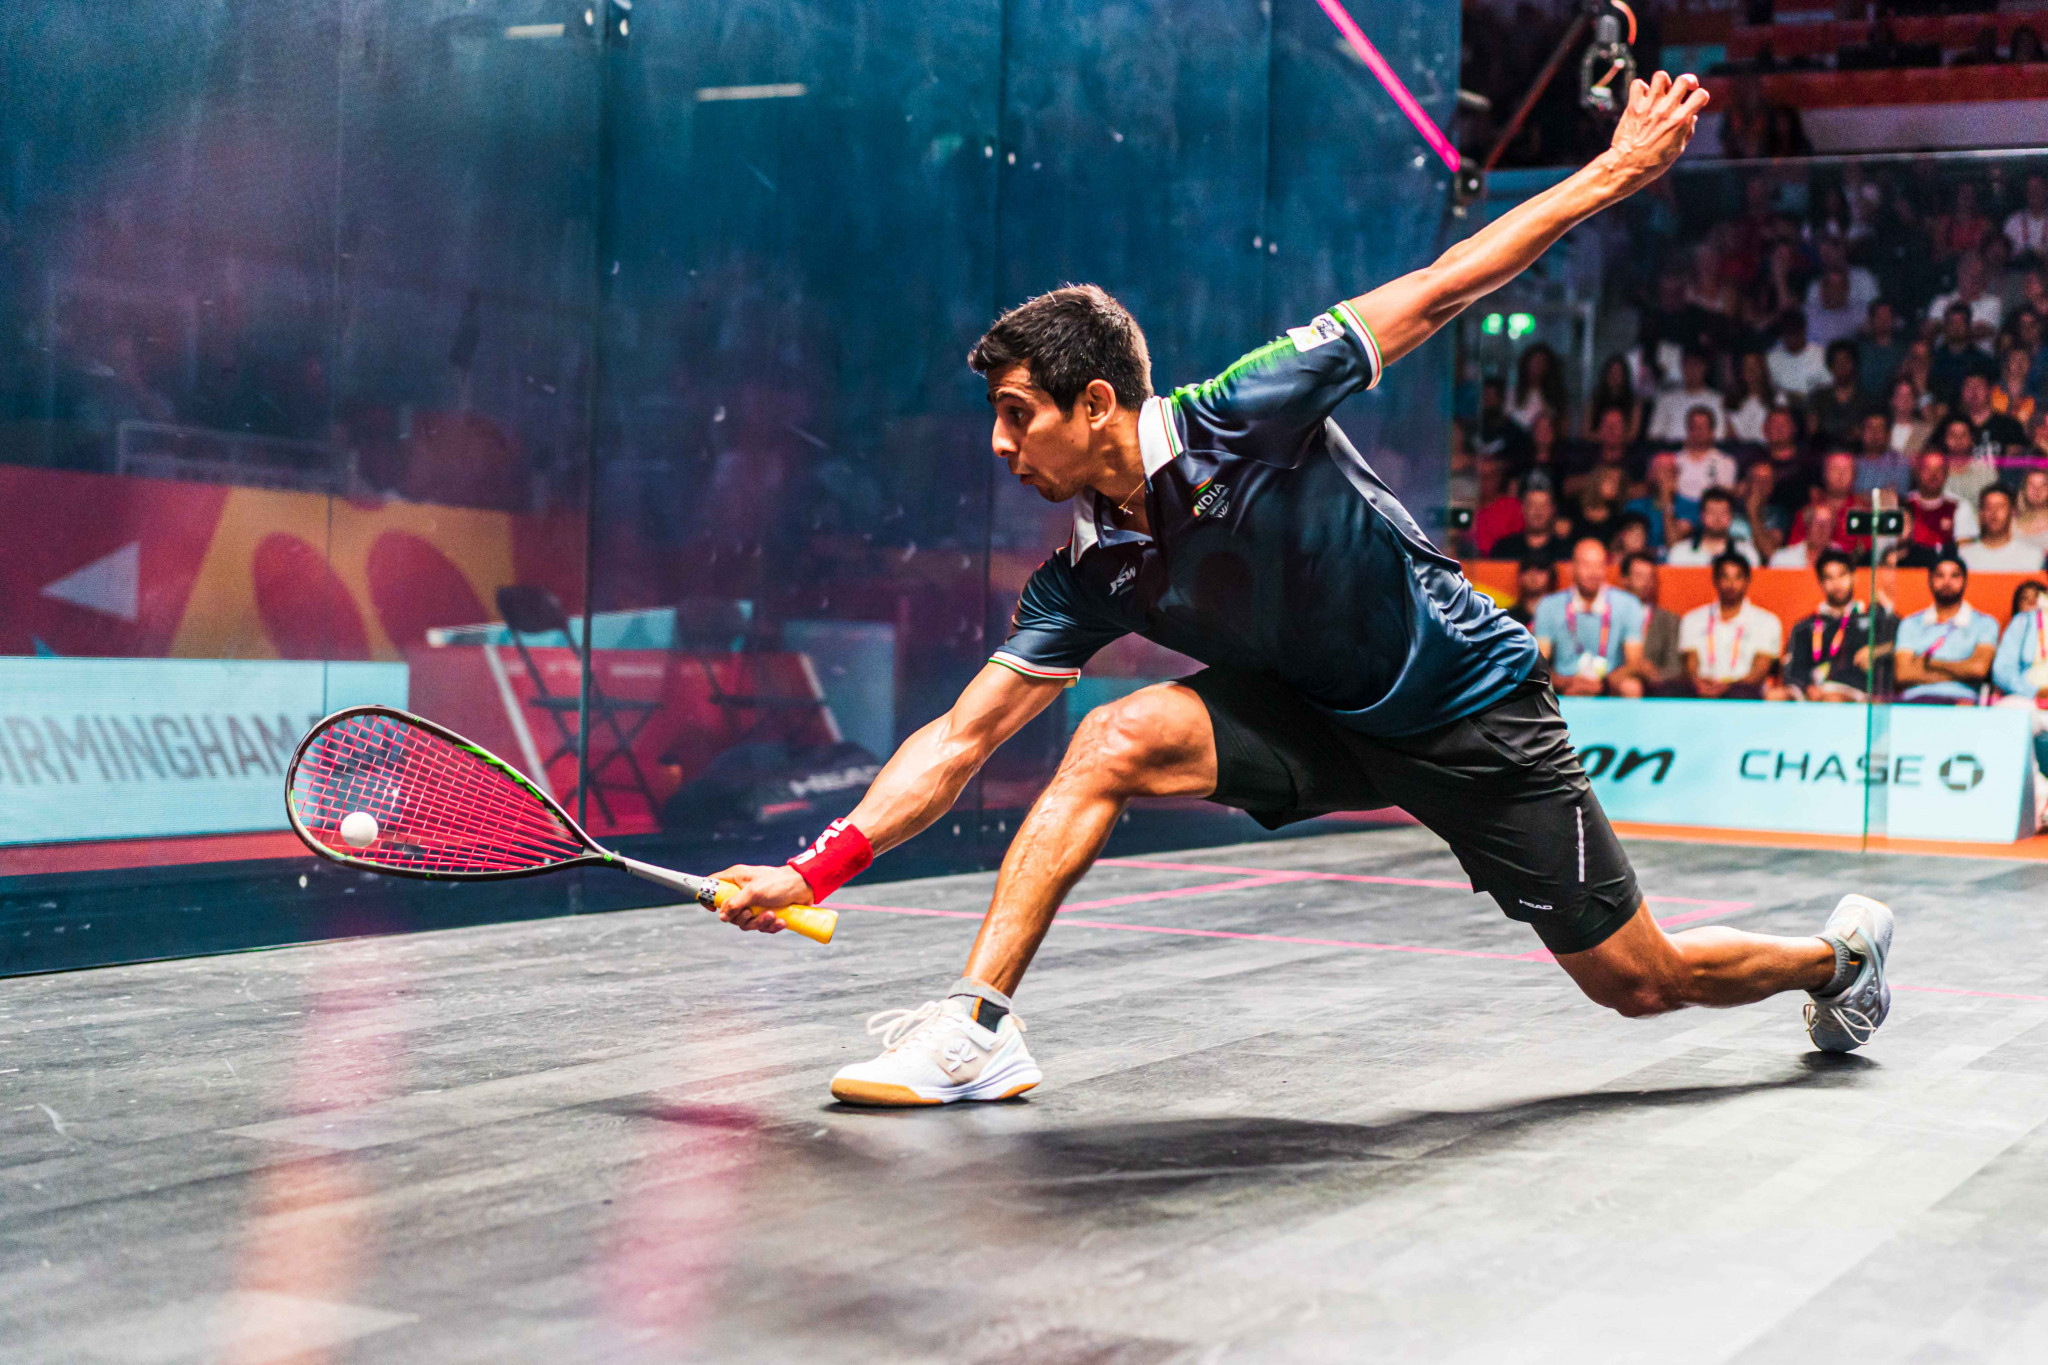 Saurav Ghosal, who lived in Chennai while playing as a junior, is set to lead India's challenge at the Squash World Cup ©WSF